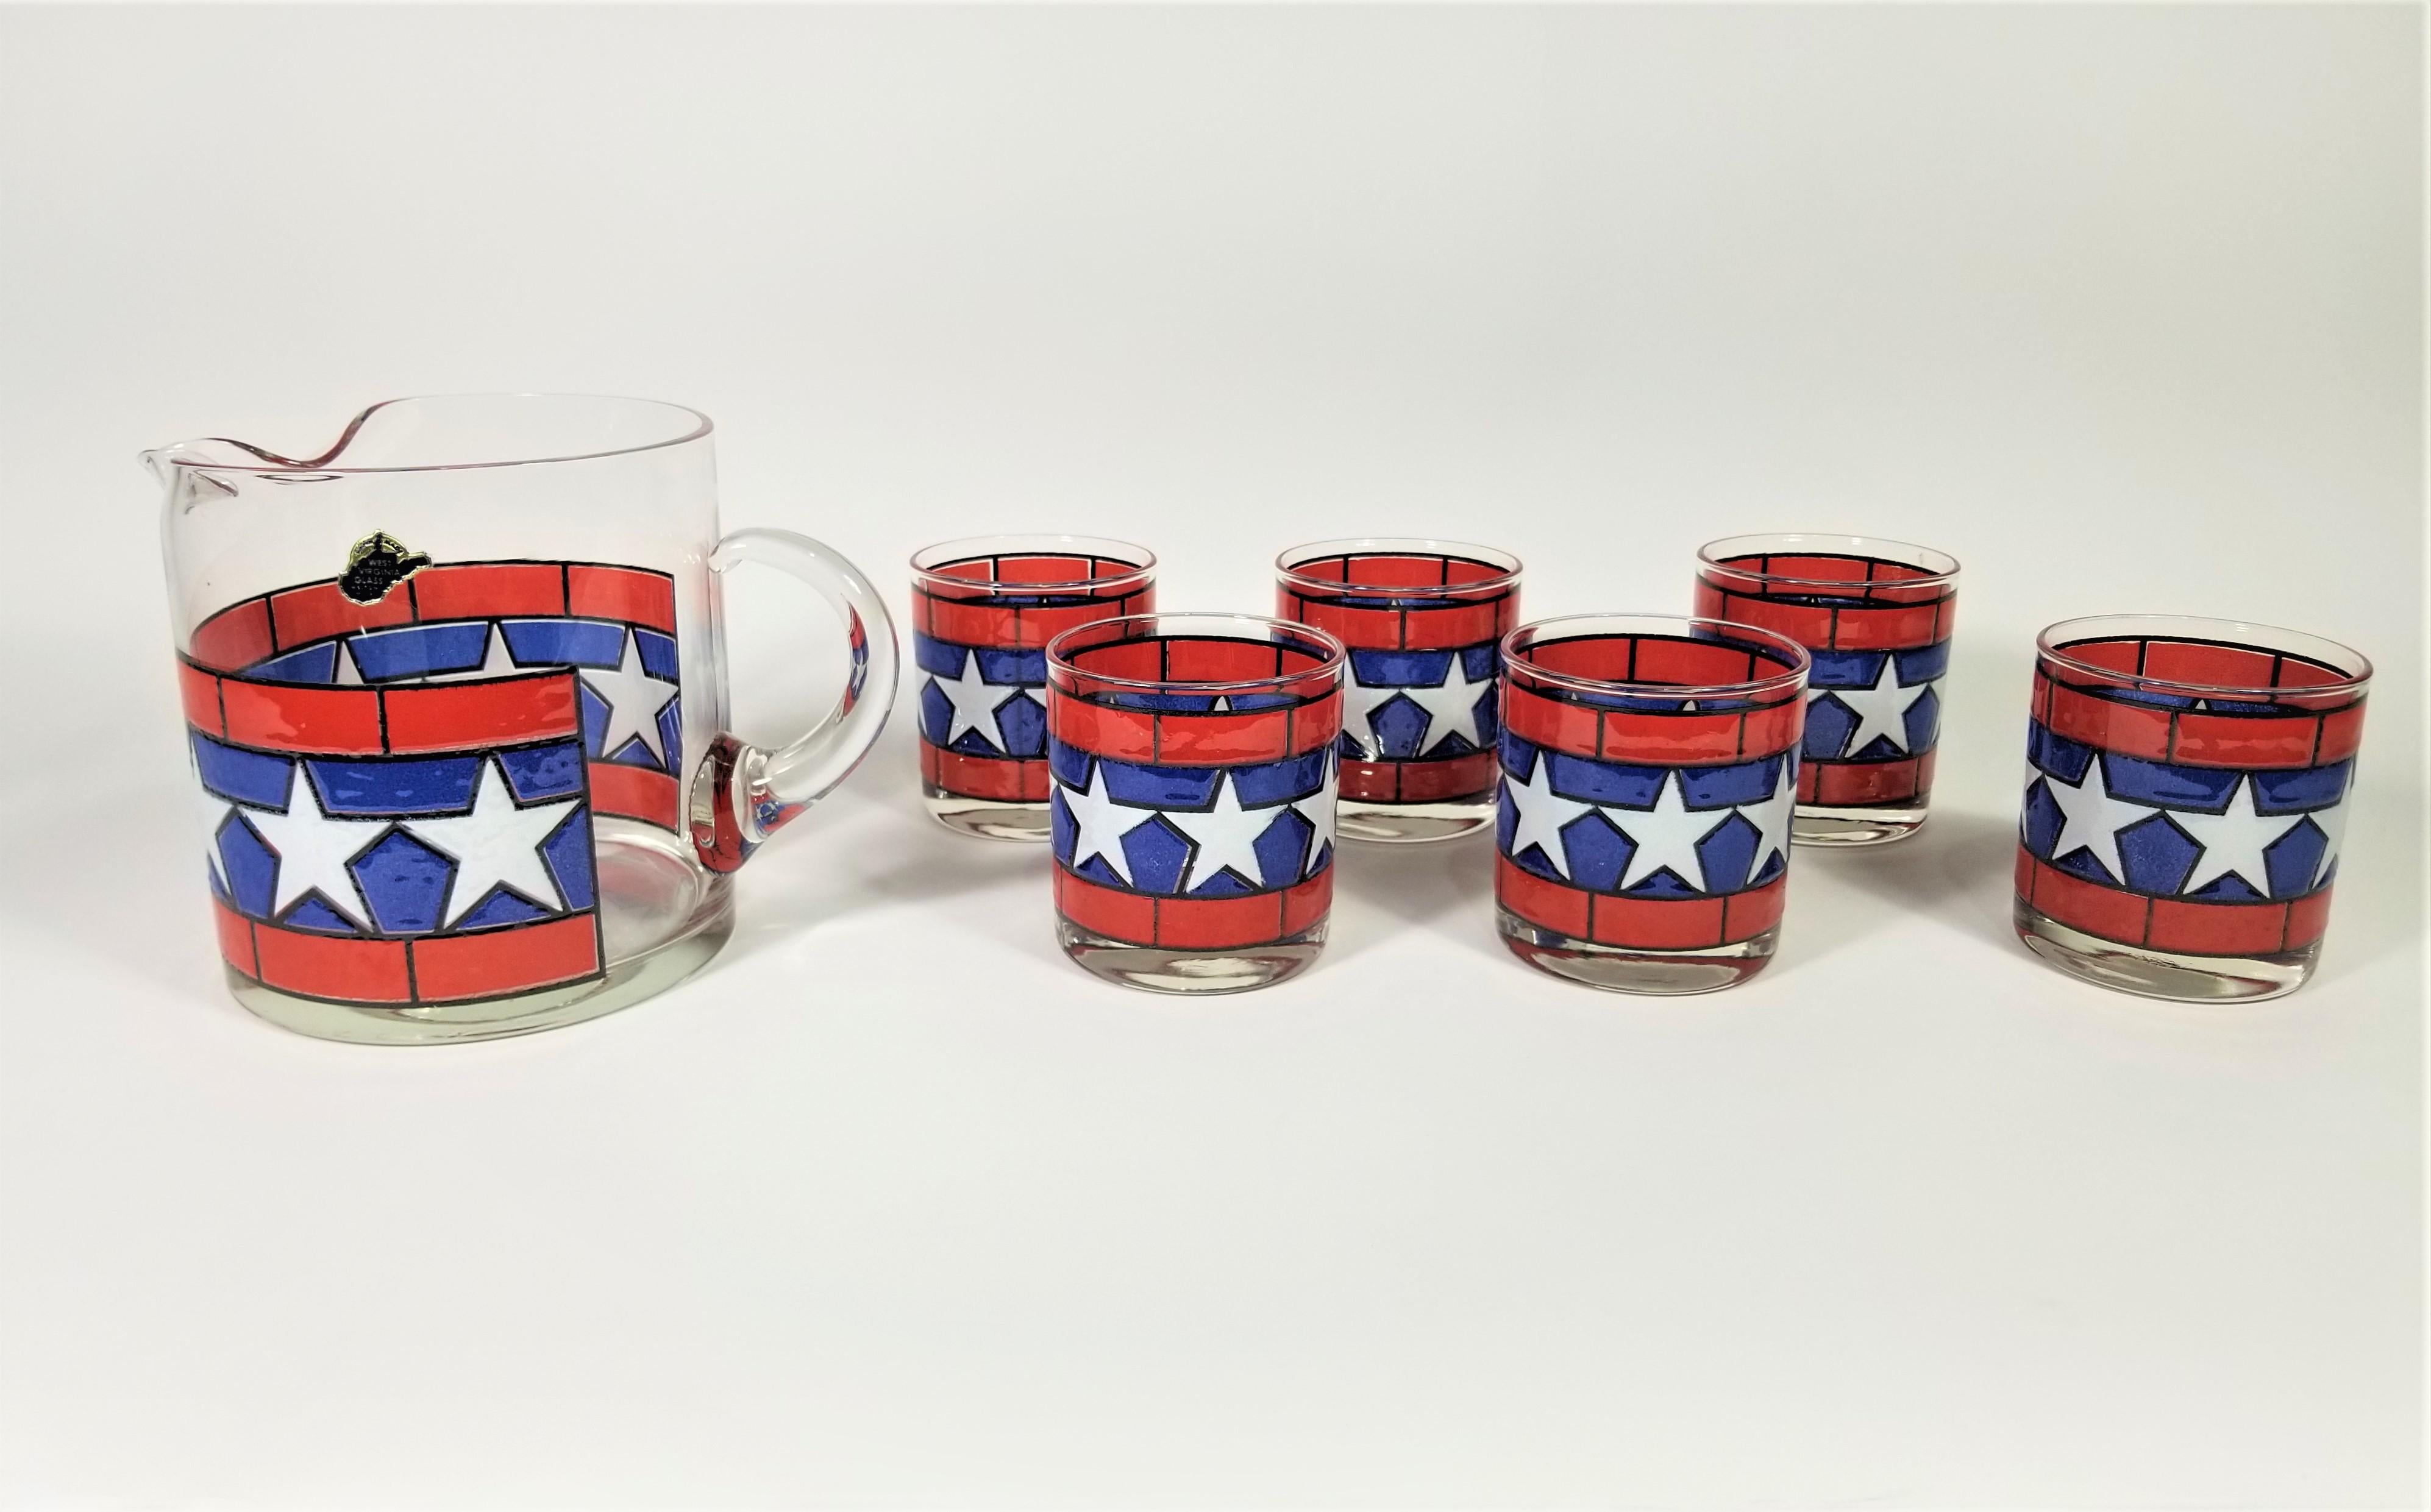 1970s, Red, White and Blue with Stars Glassware Barware Set of 6 with Pitcher For Sale 4